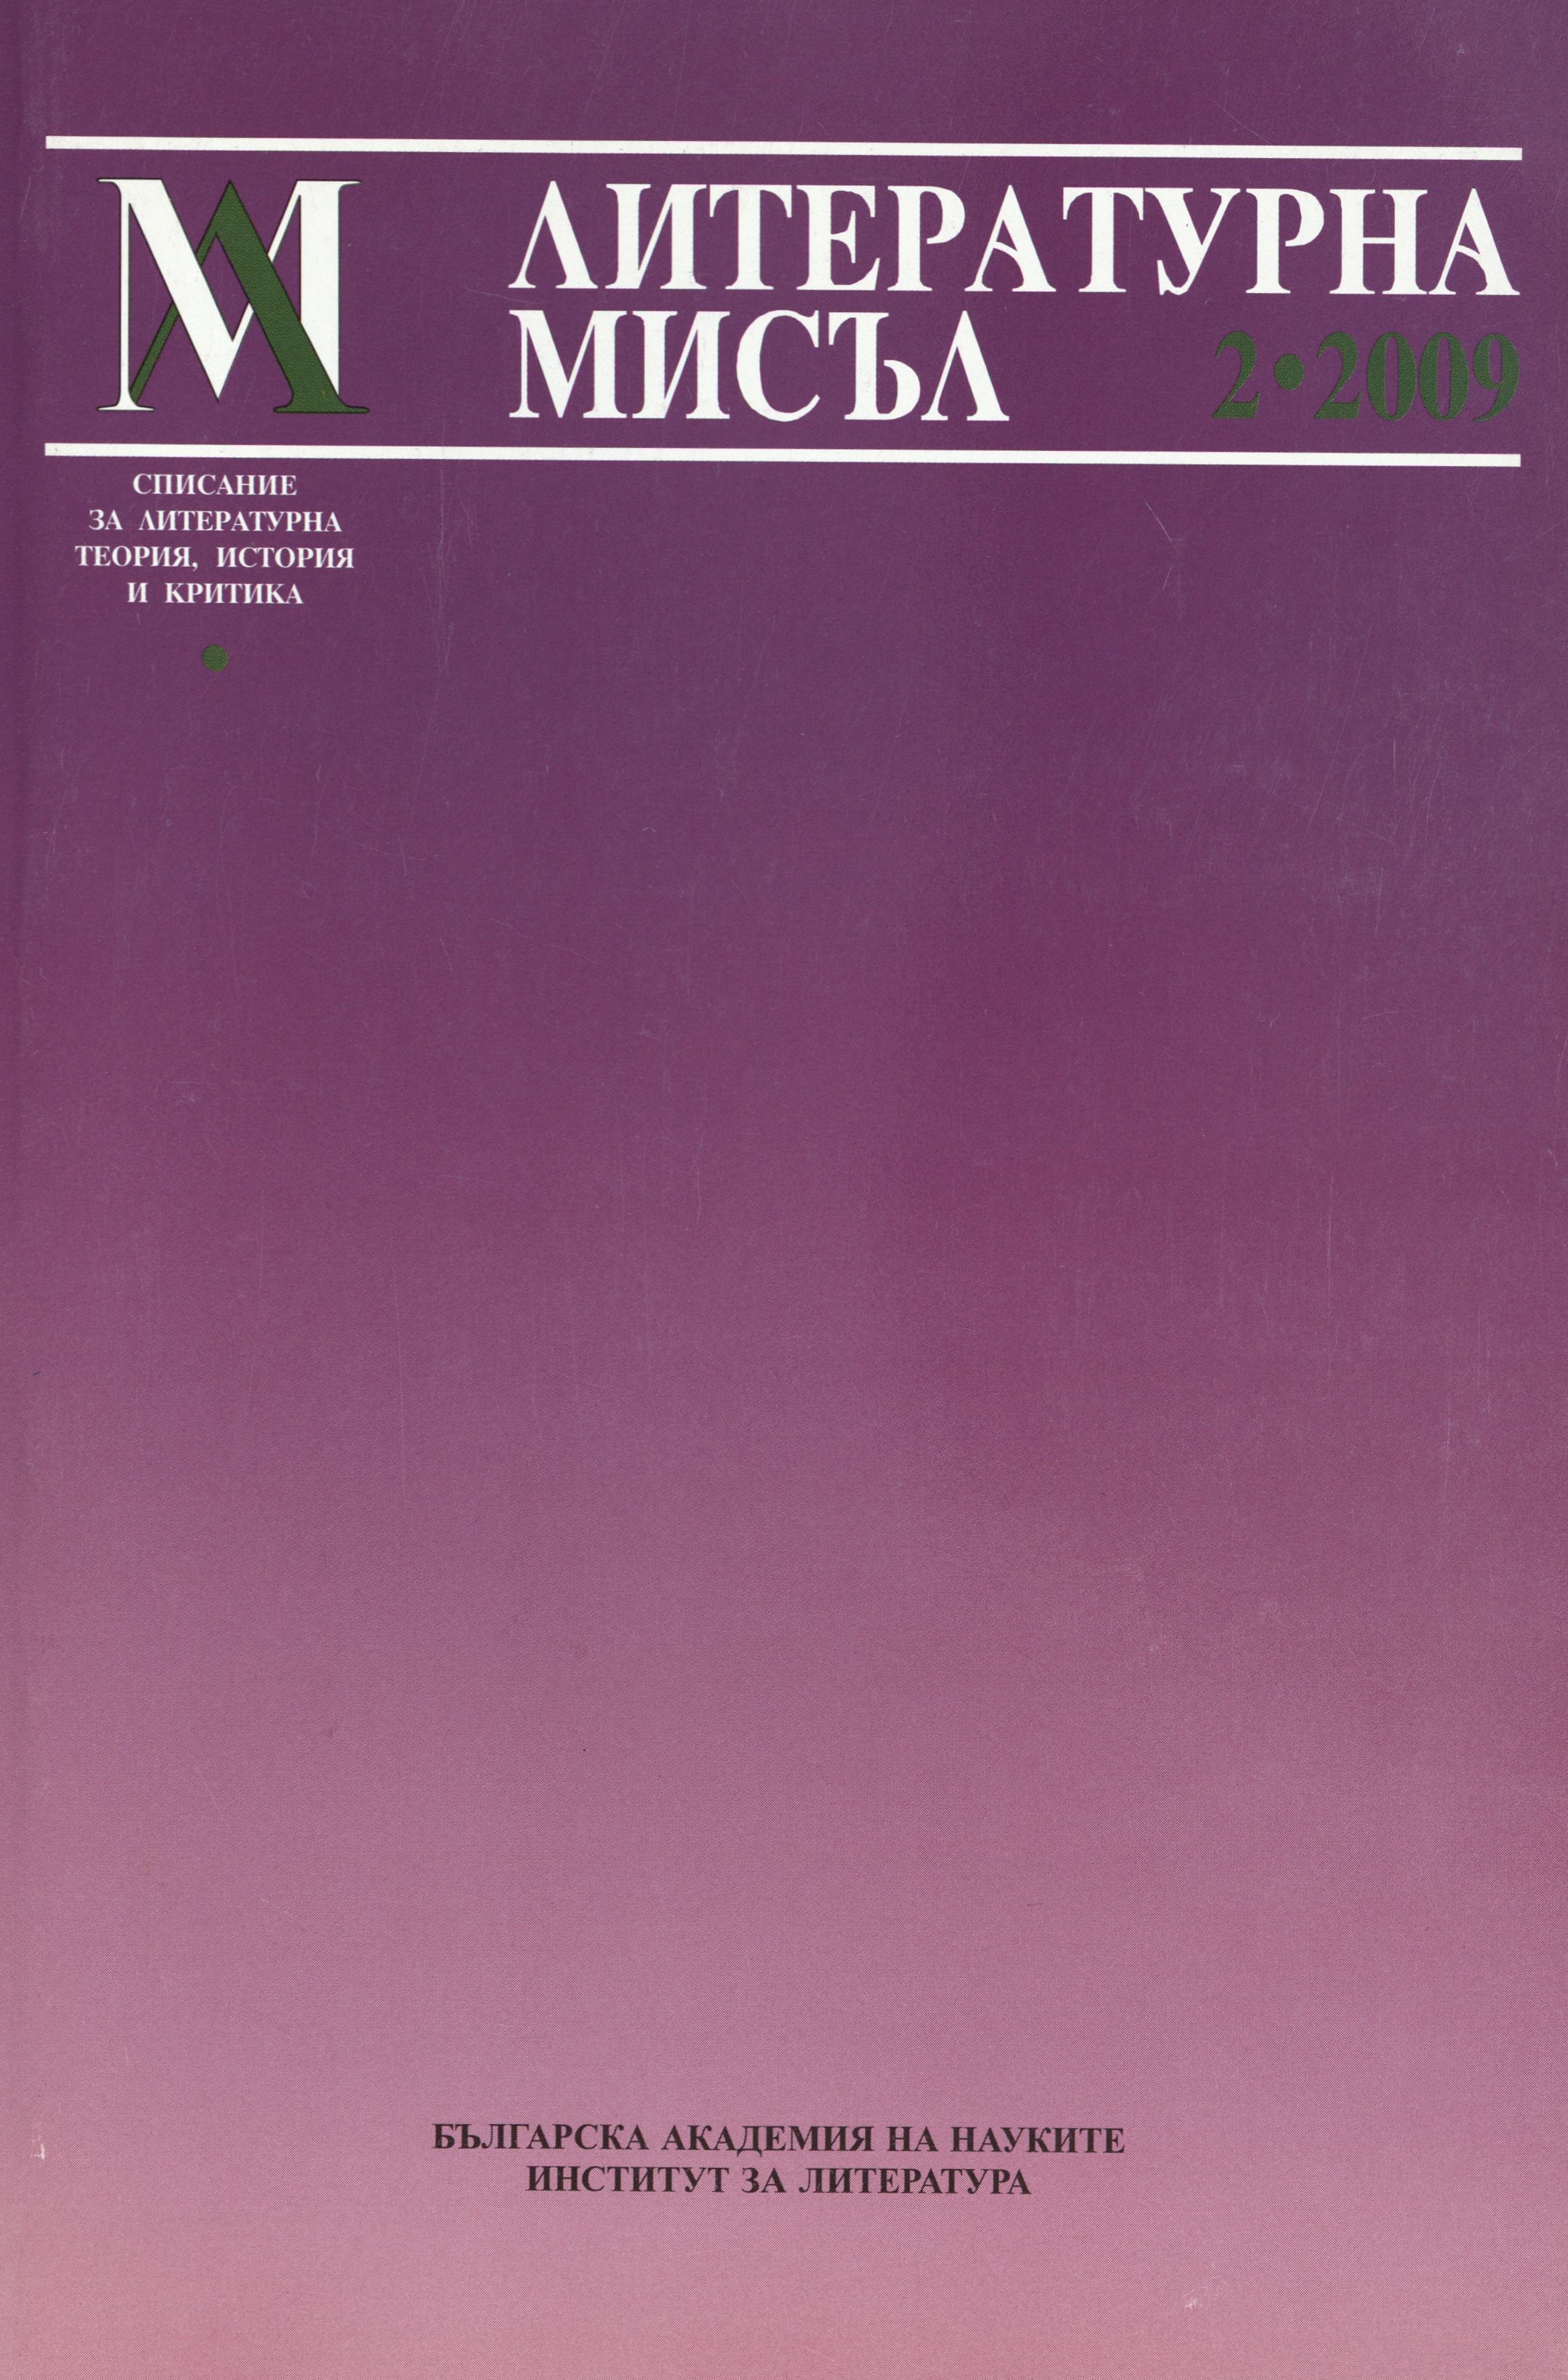 Issue 2, 1990